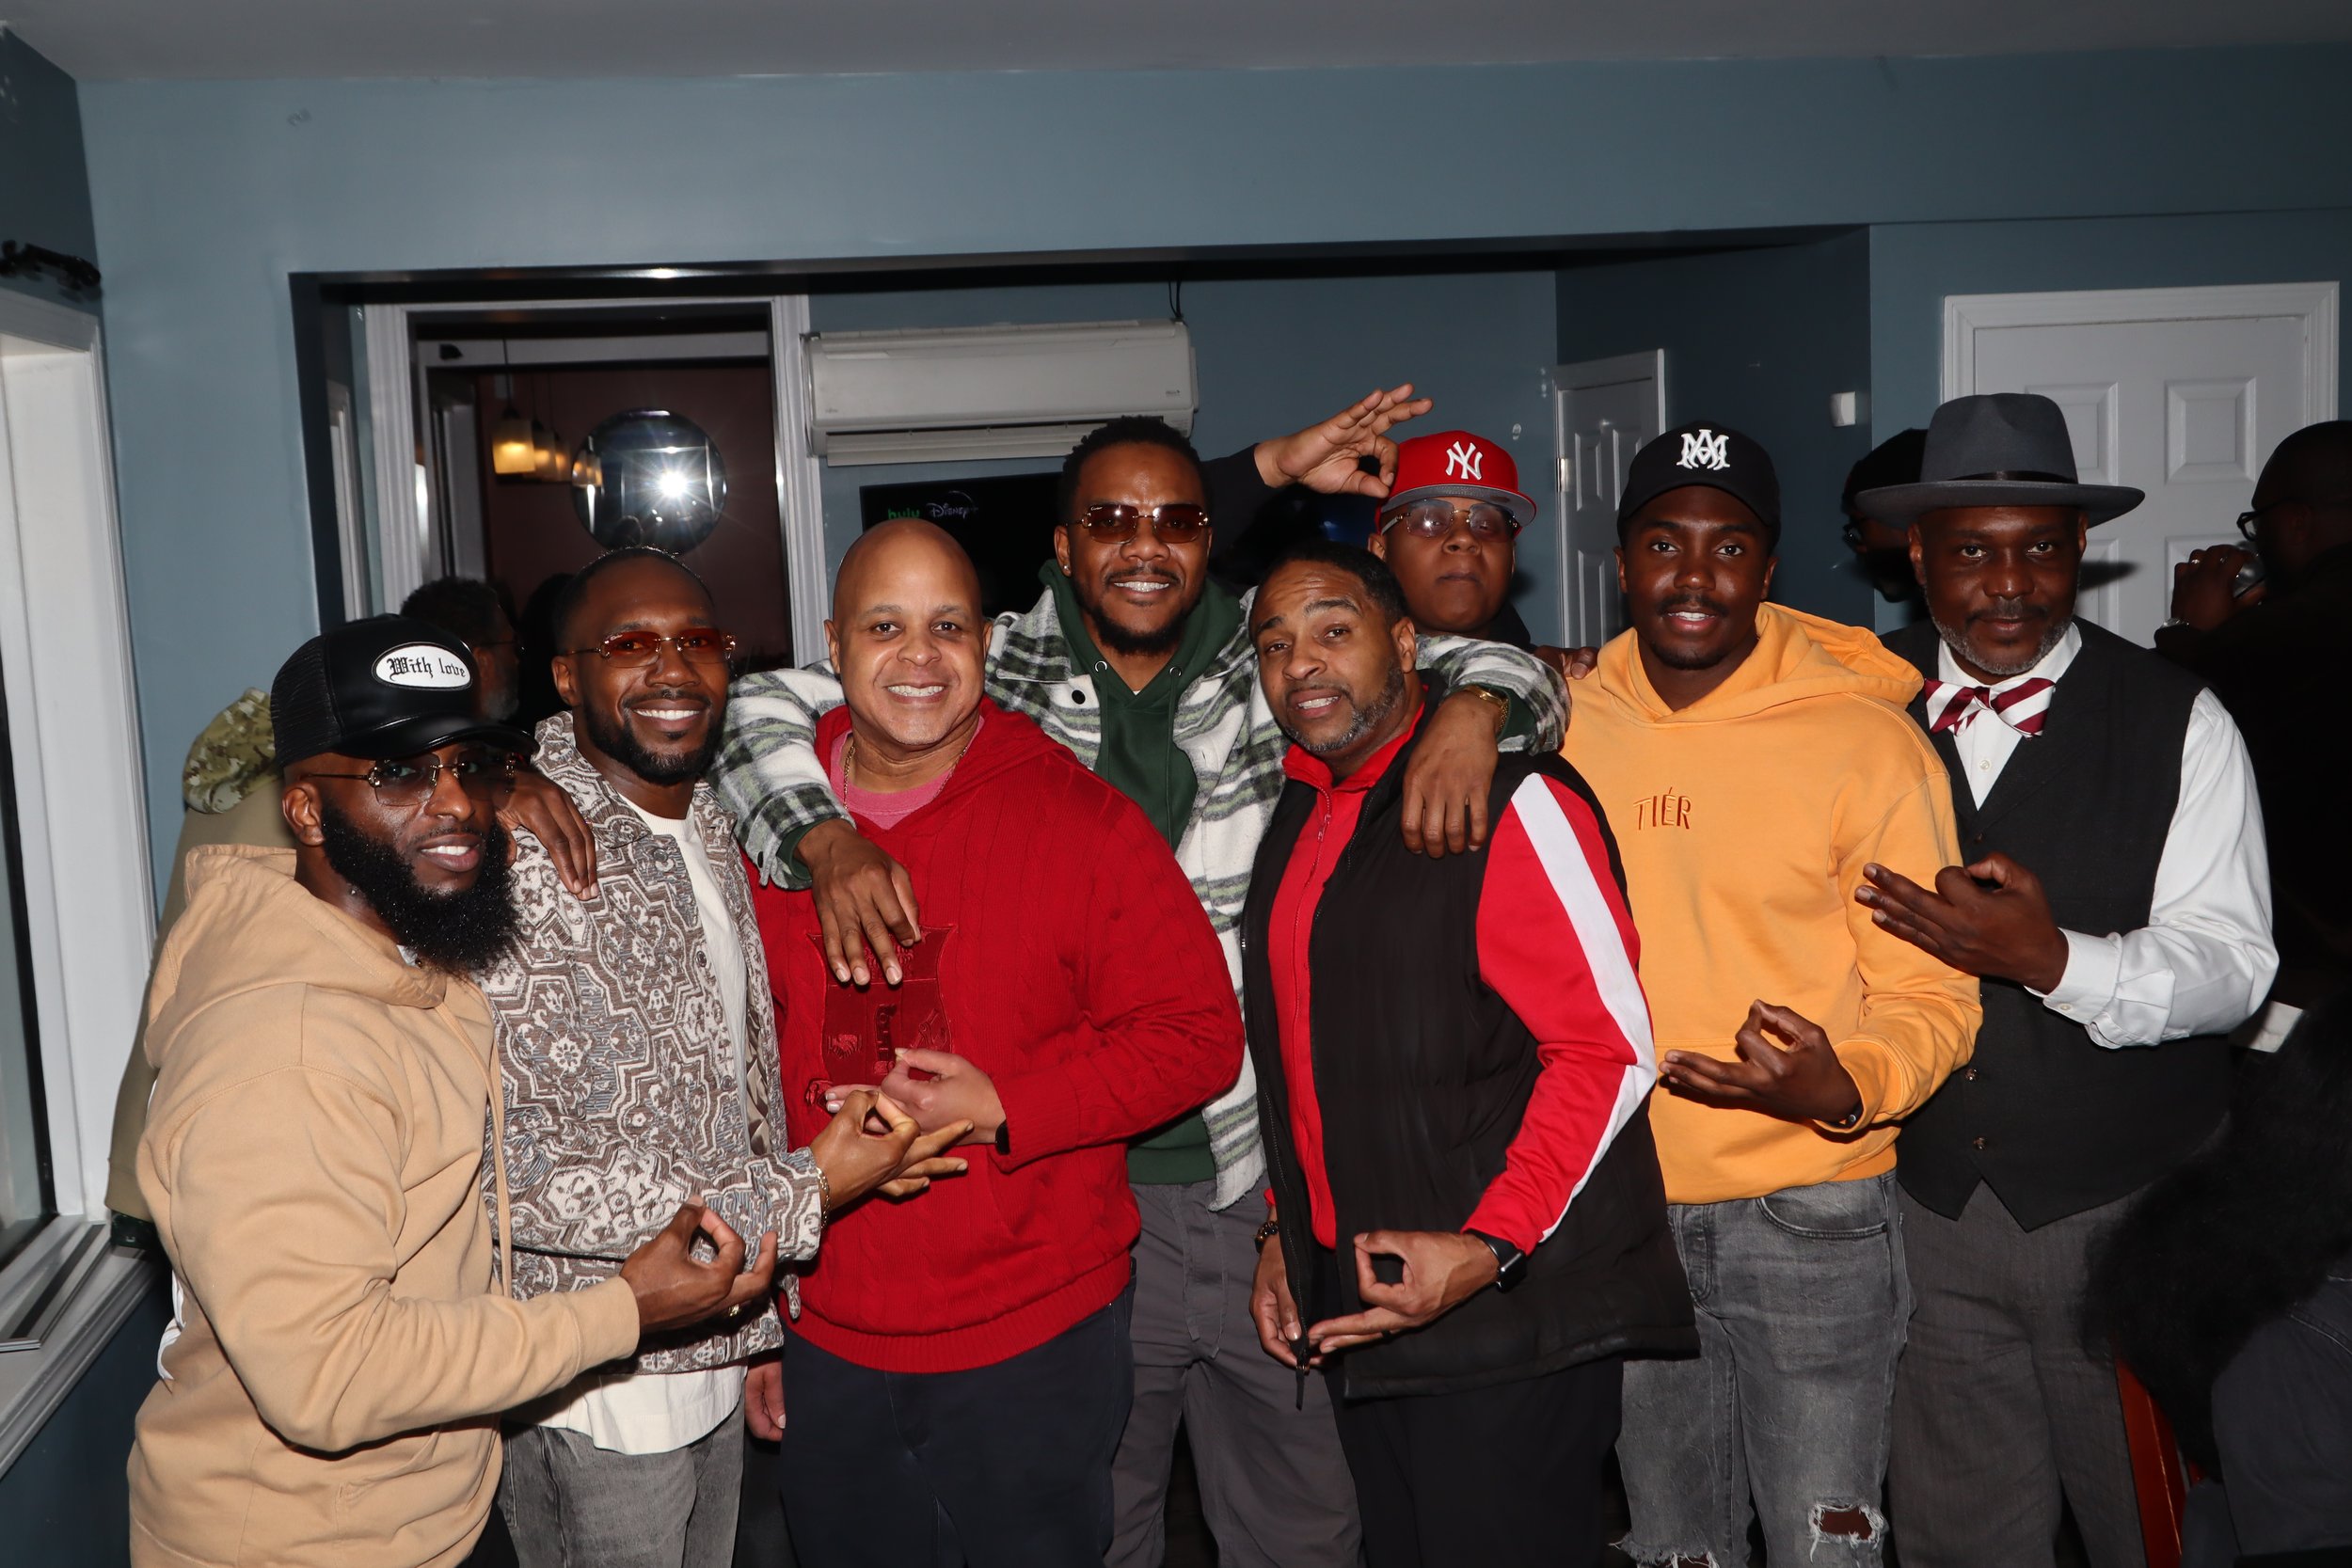 Nupes having fun at Founders' Day celebration